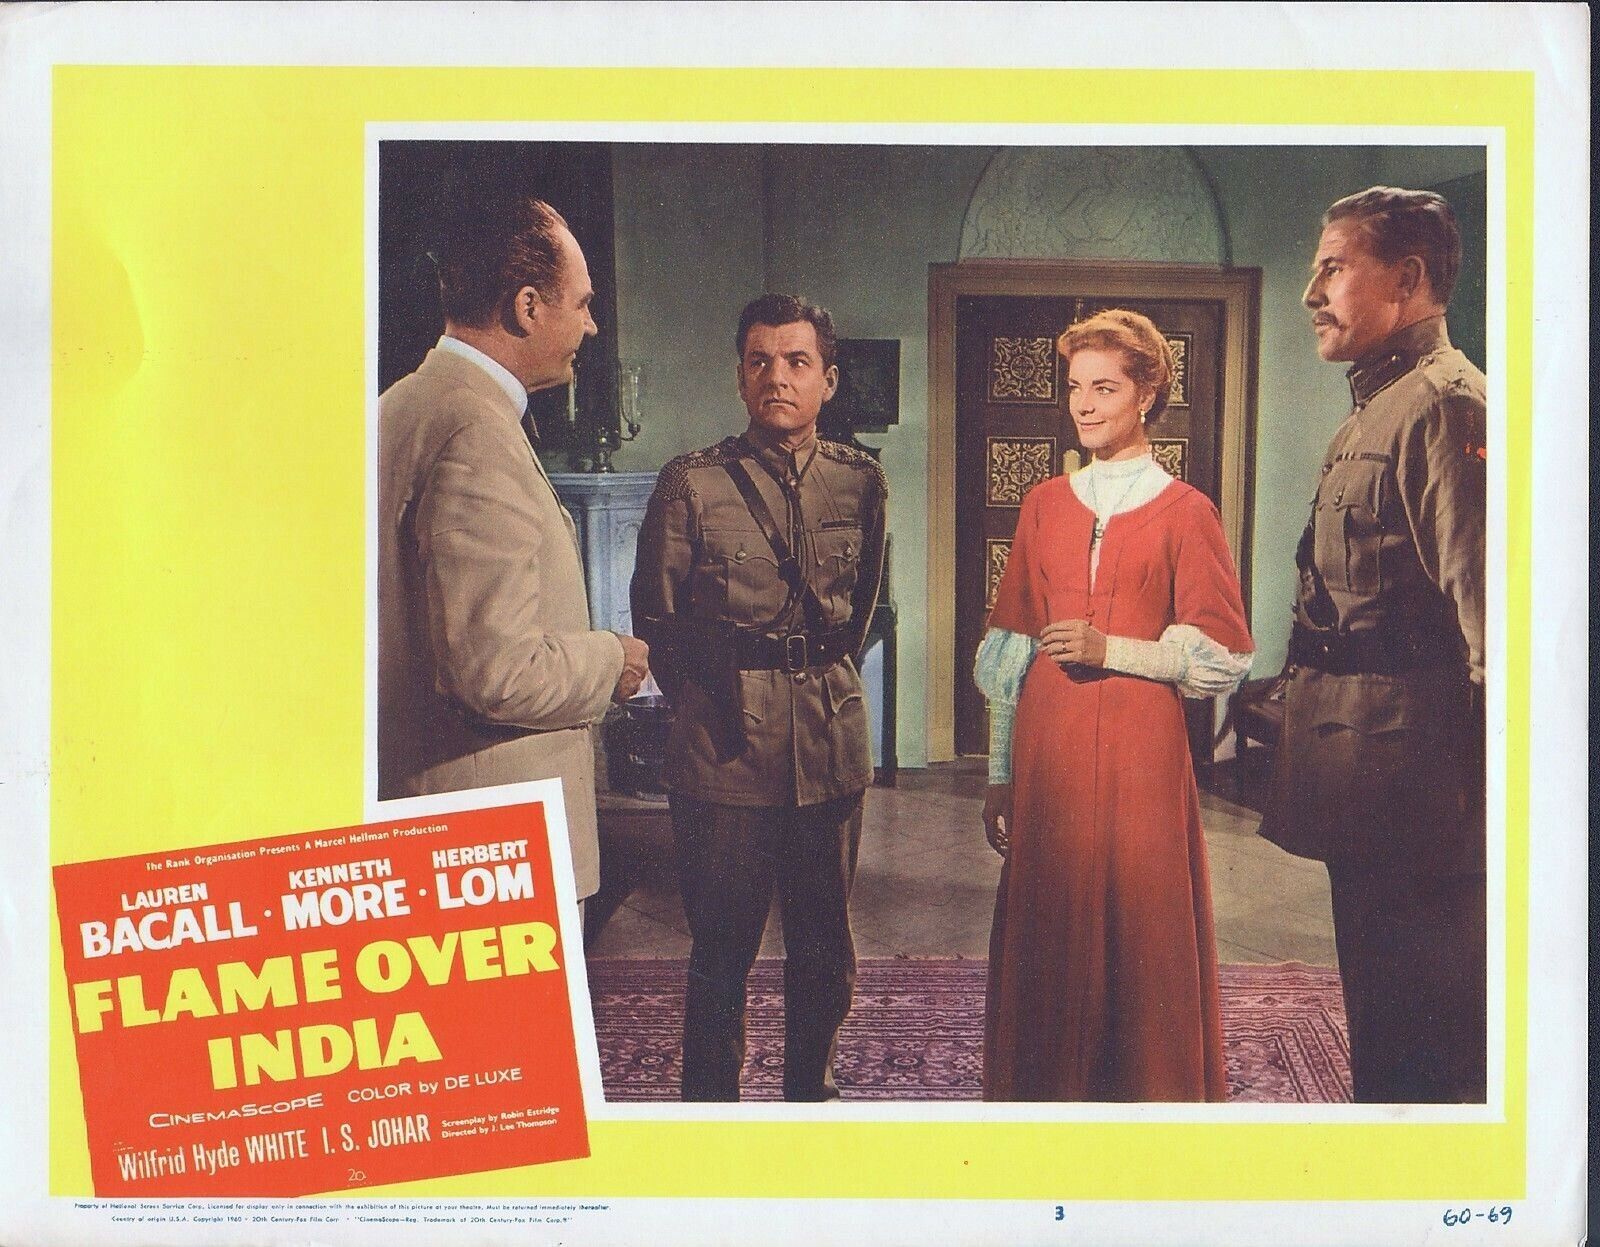 LAUREN BACALL, Flame Over India (‘60) Lobby Card #3, Kenneth More, Herbert Lom